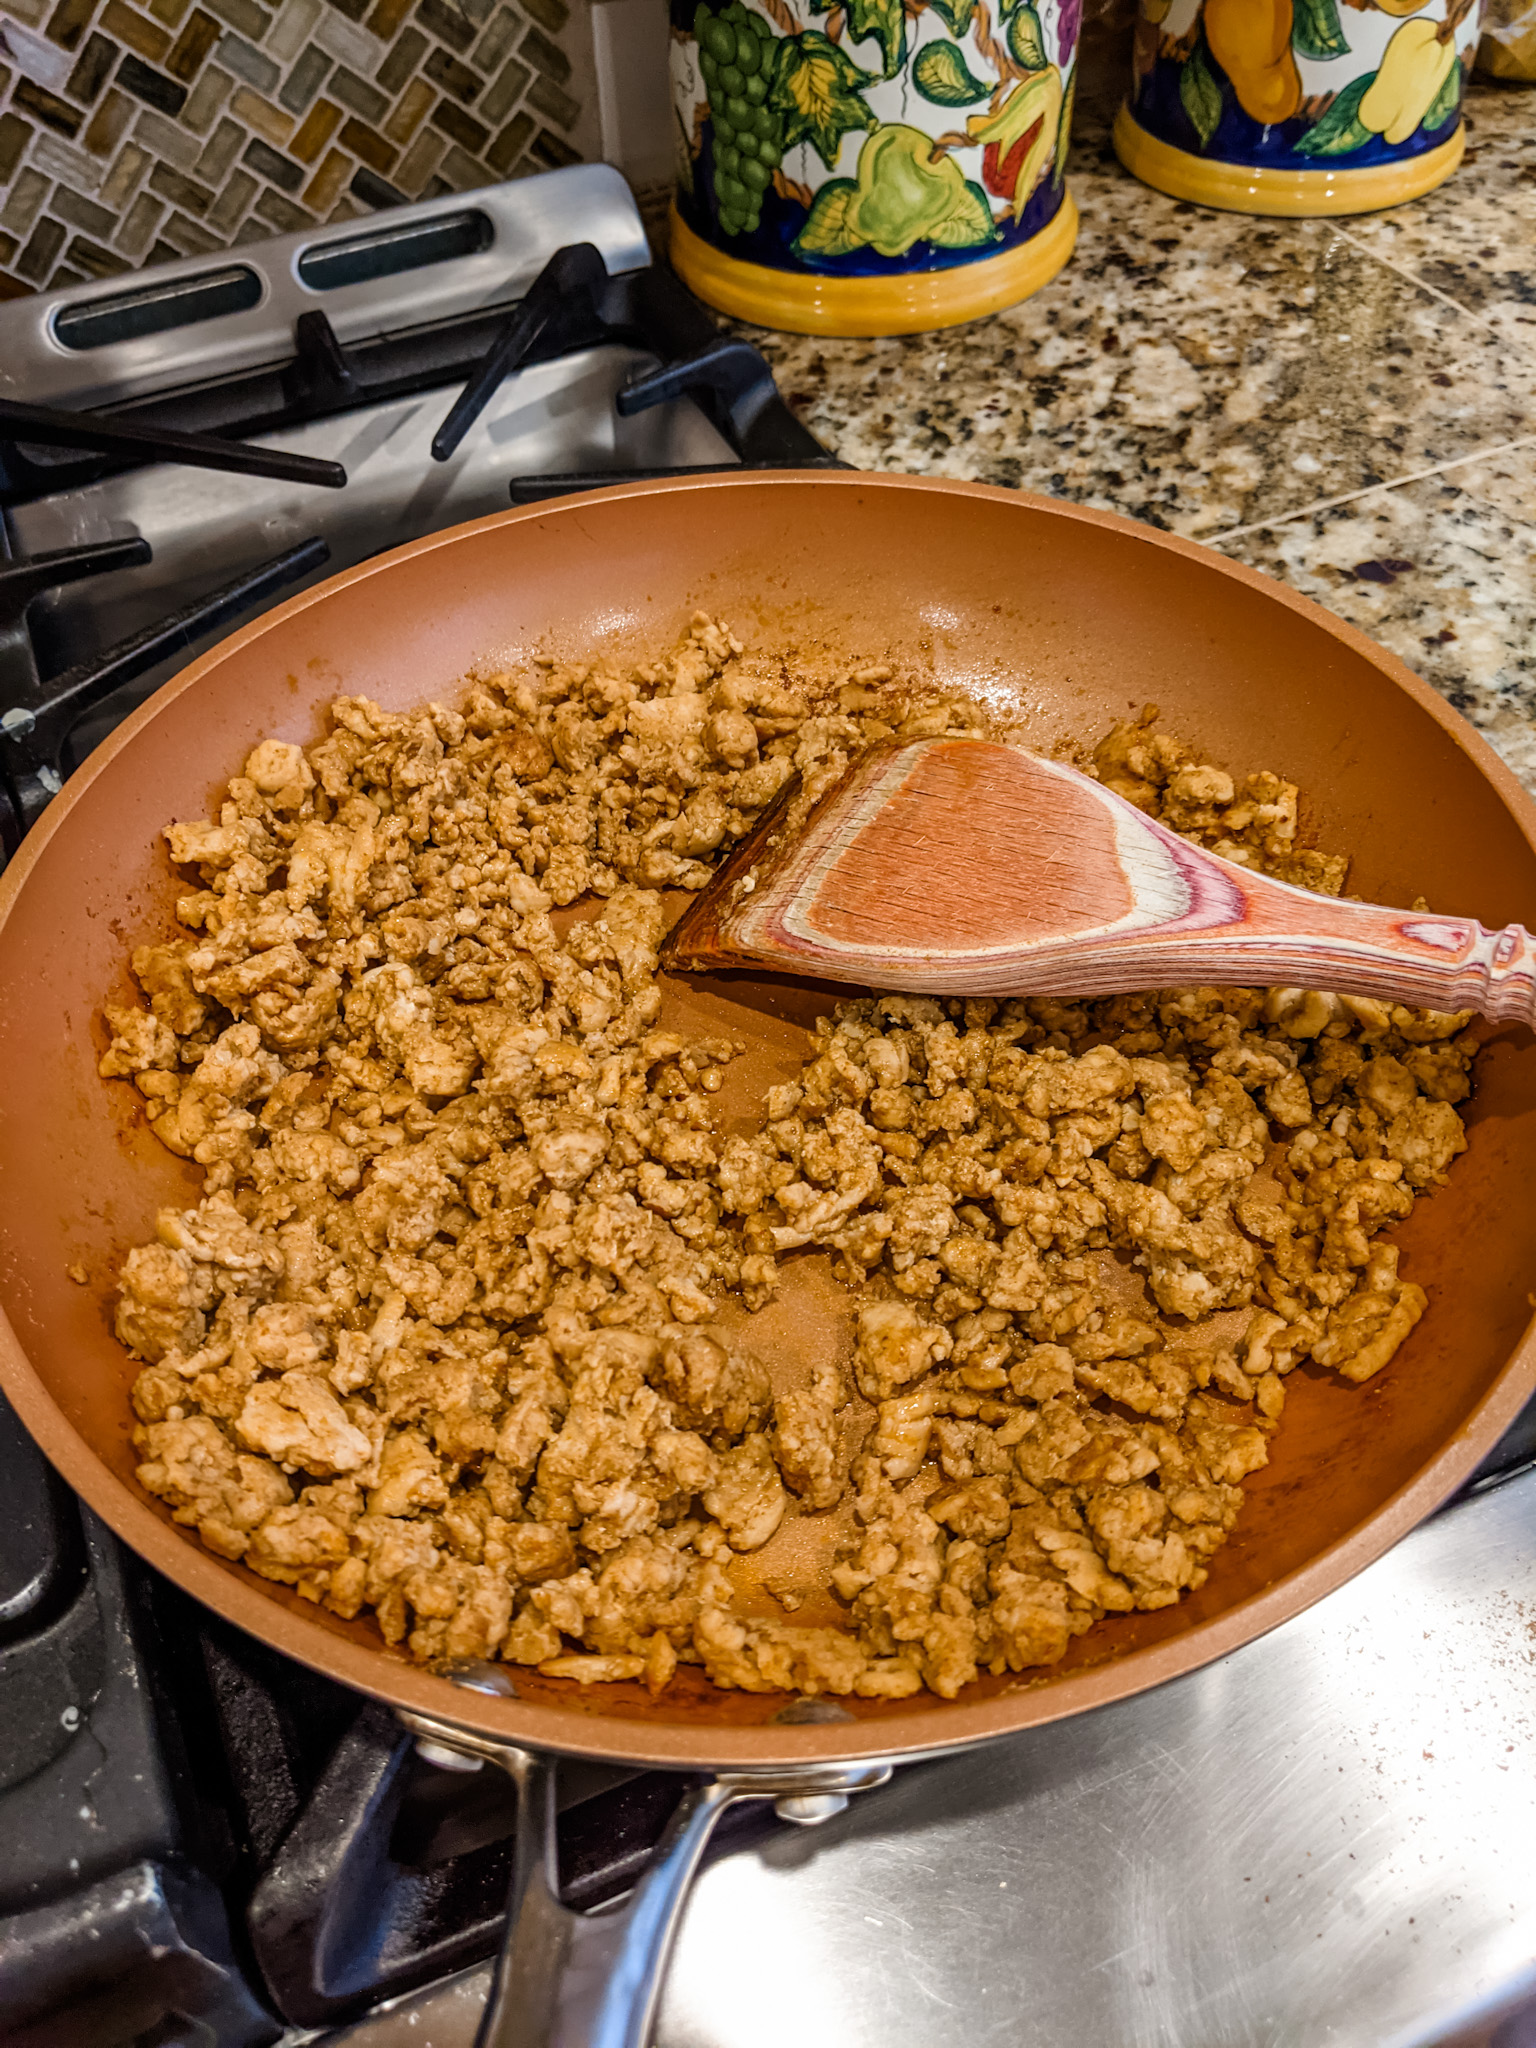 Chicken with taco mix, browning in a pan.